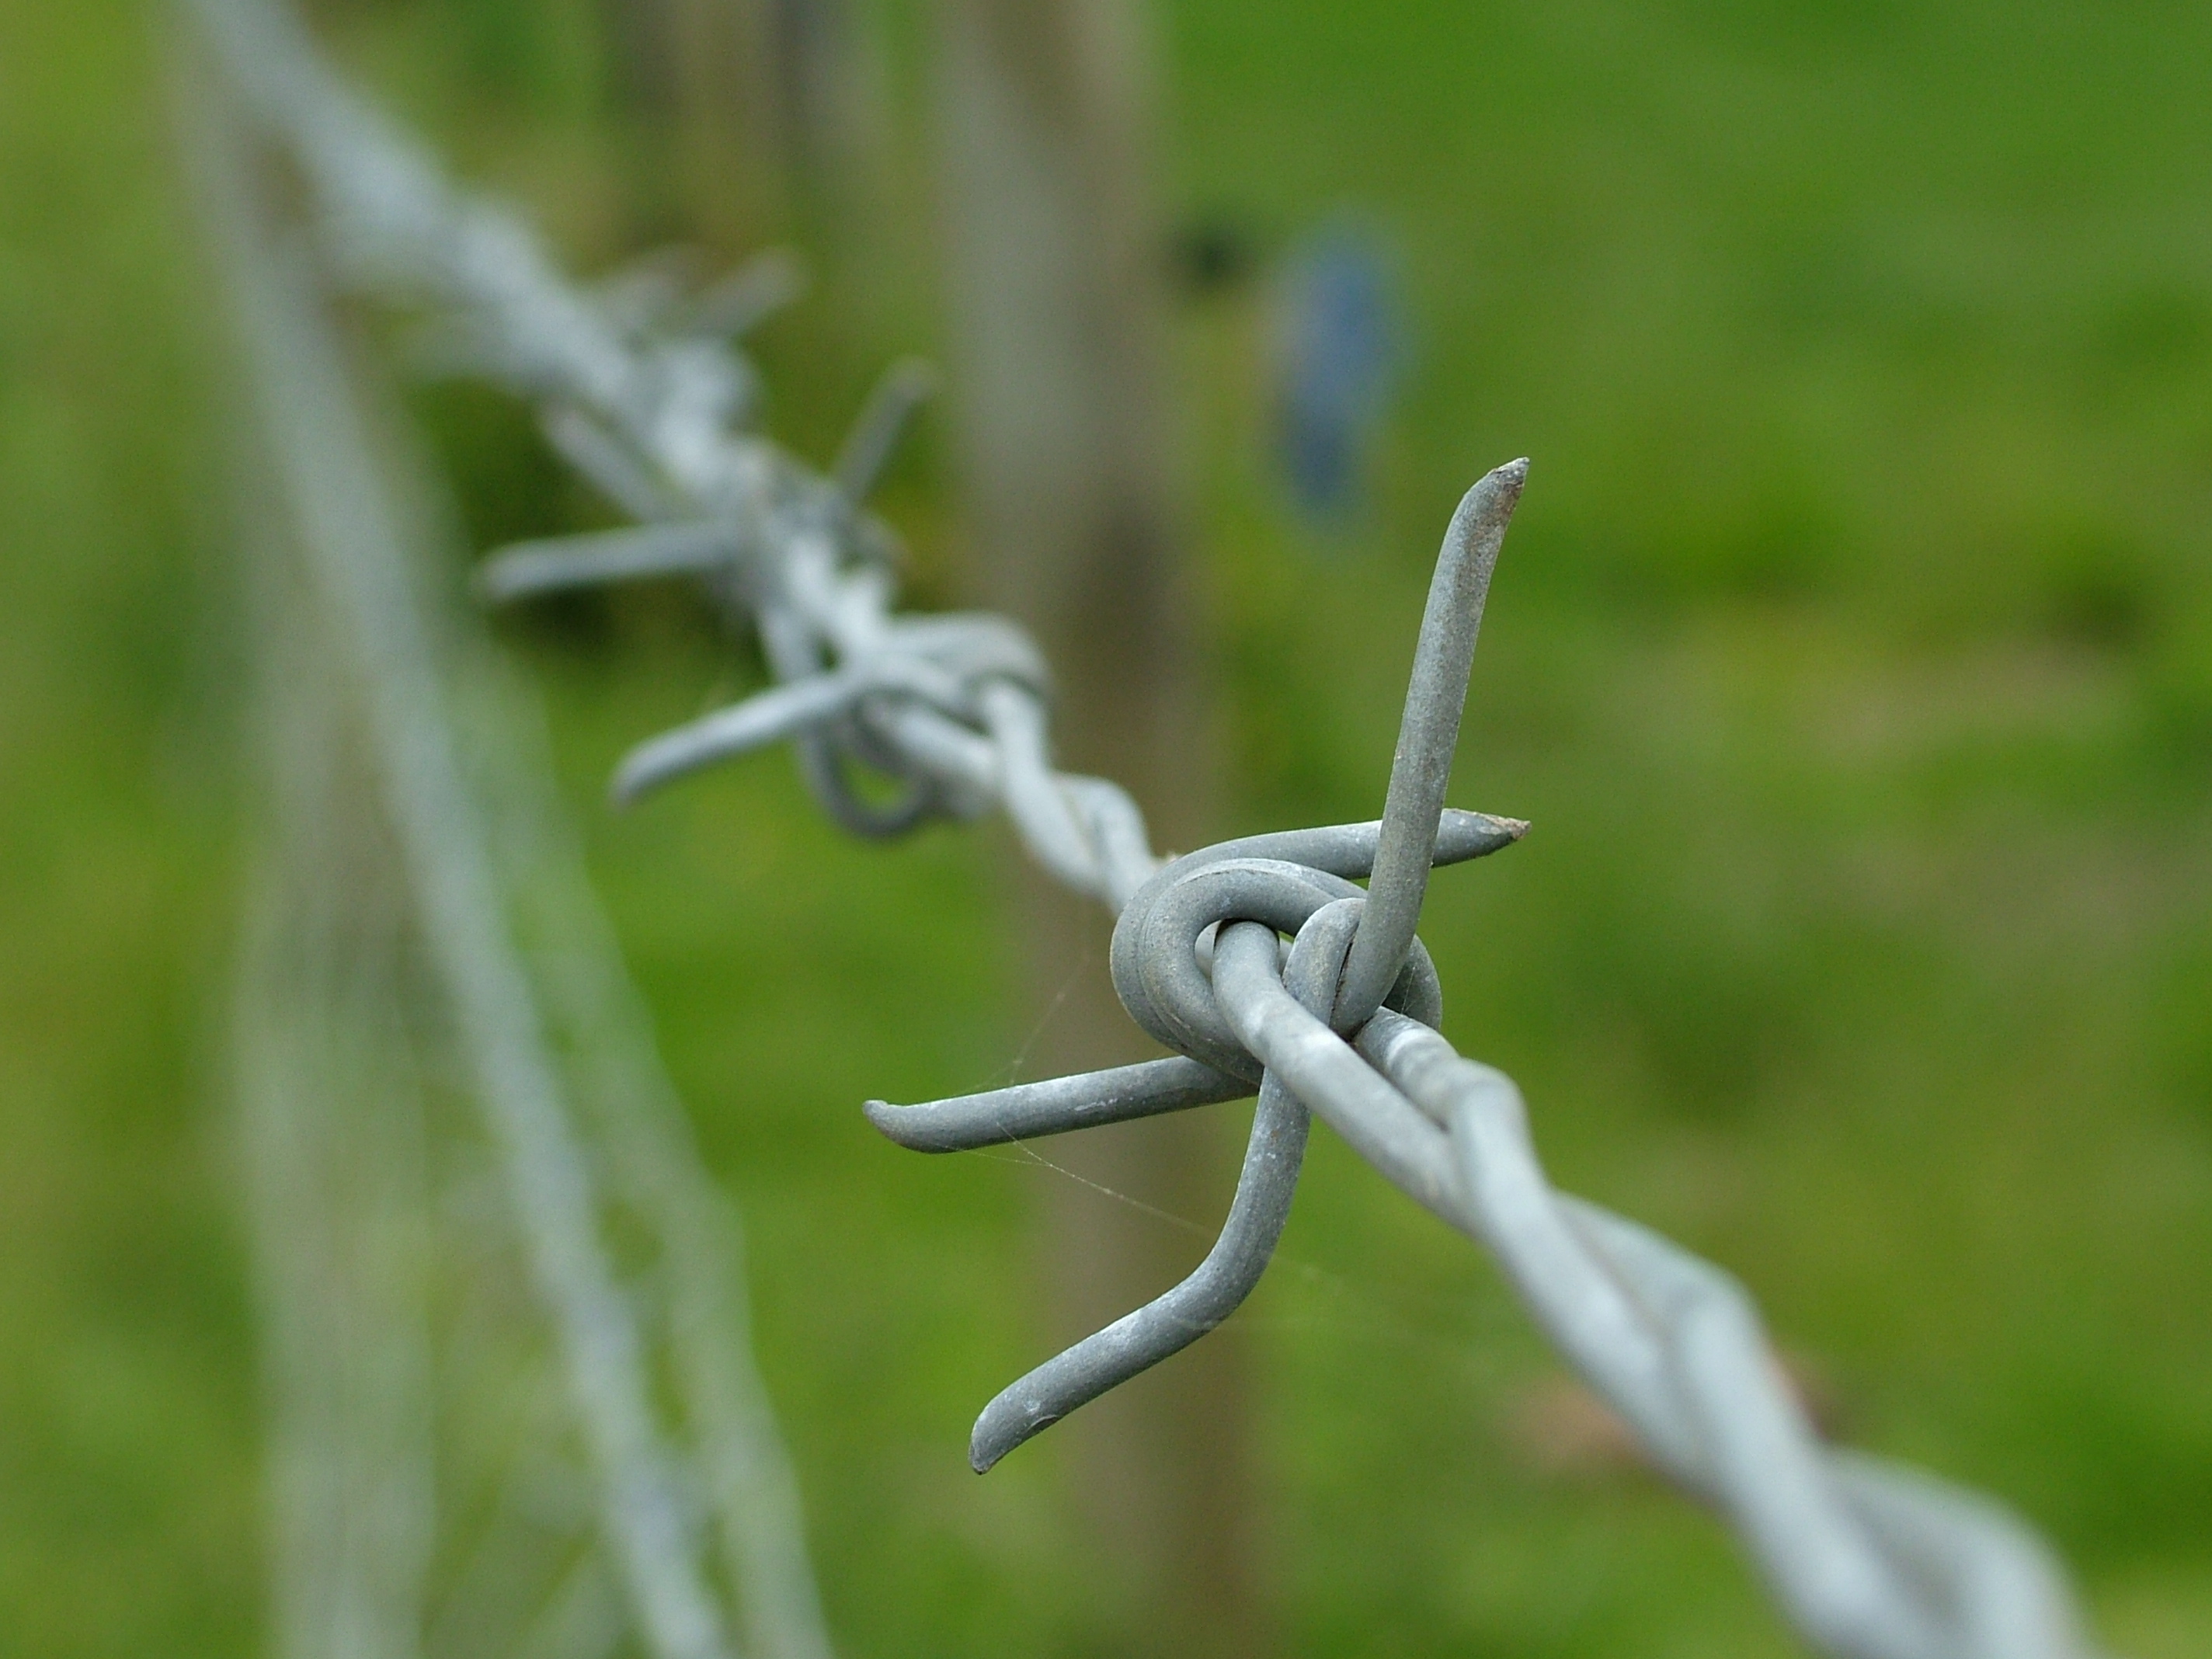 barbed wire2